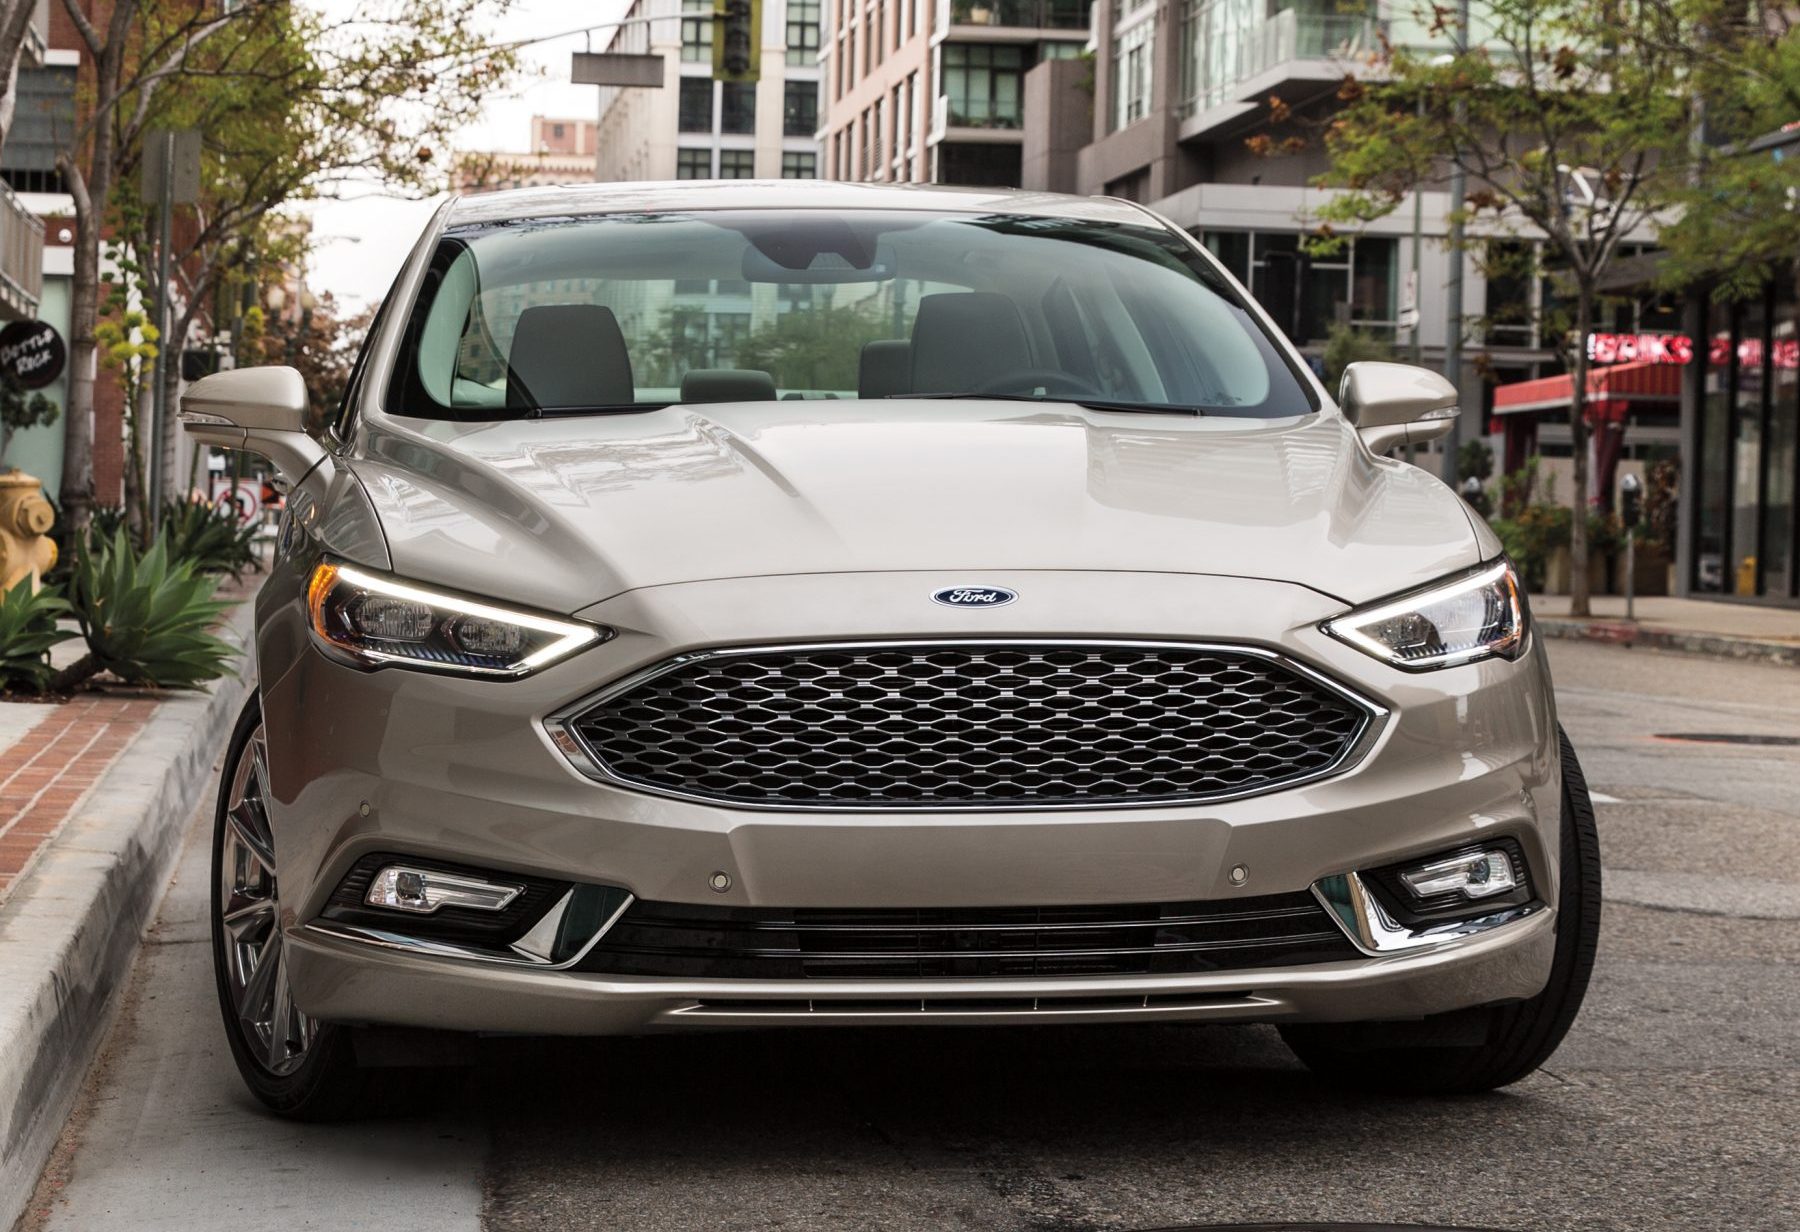 2018 Ford Fusion Hybrid One Of The Most Well Rounded